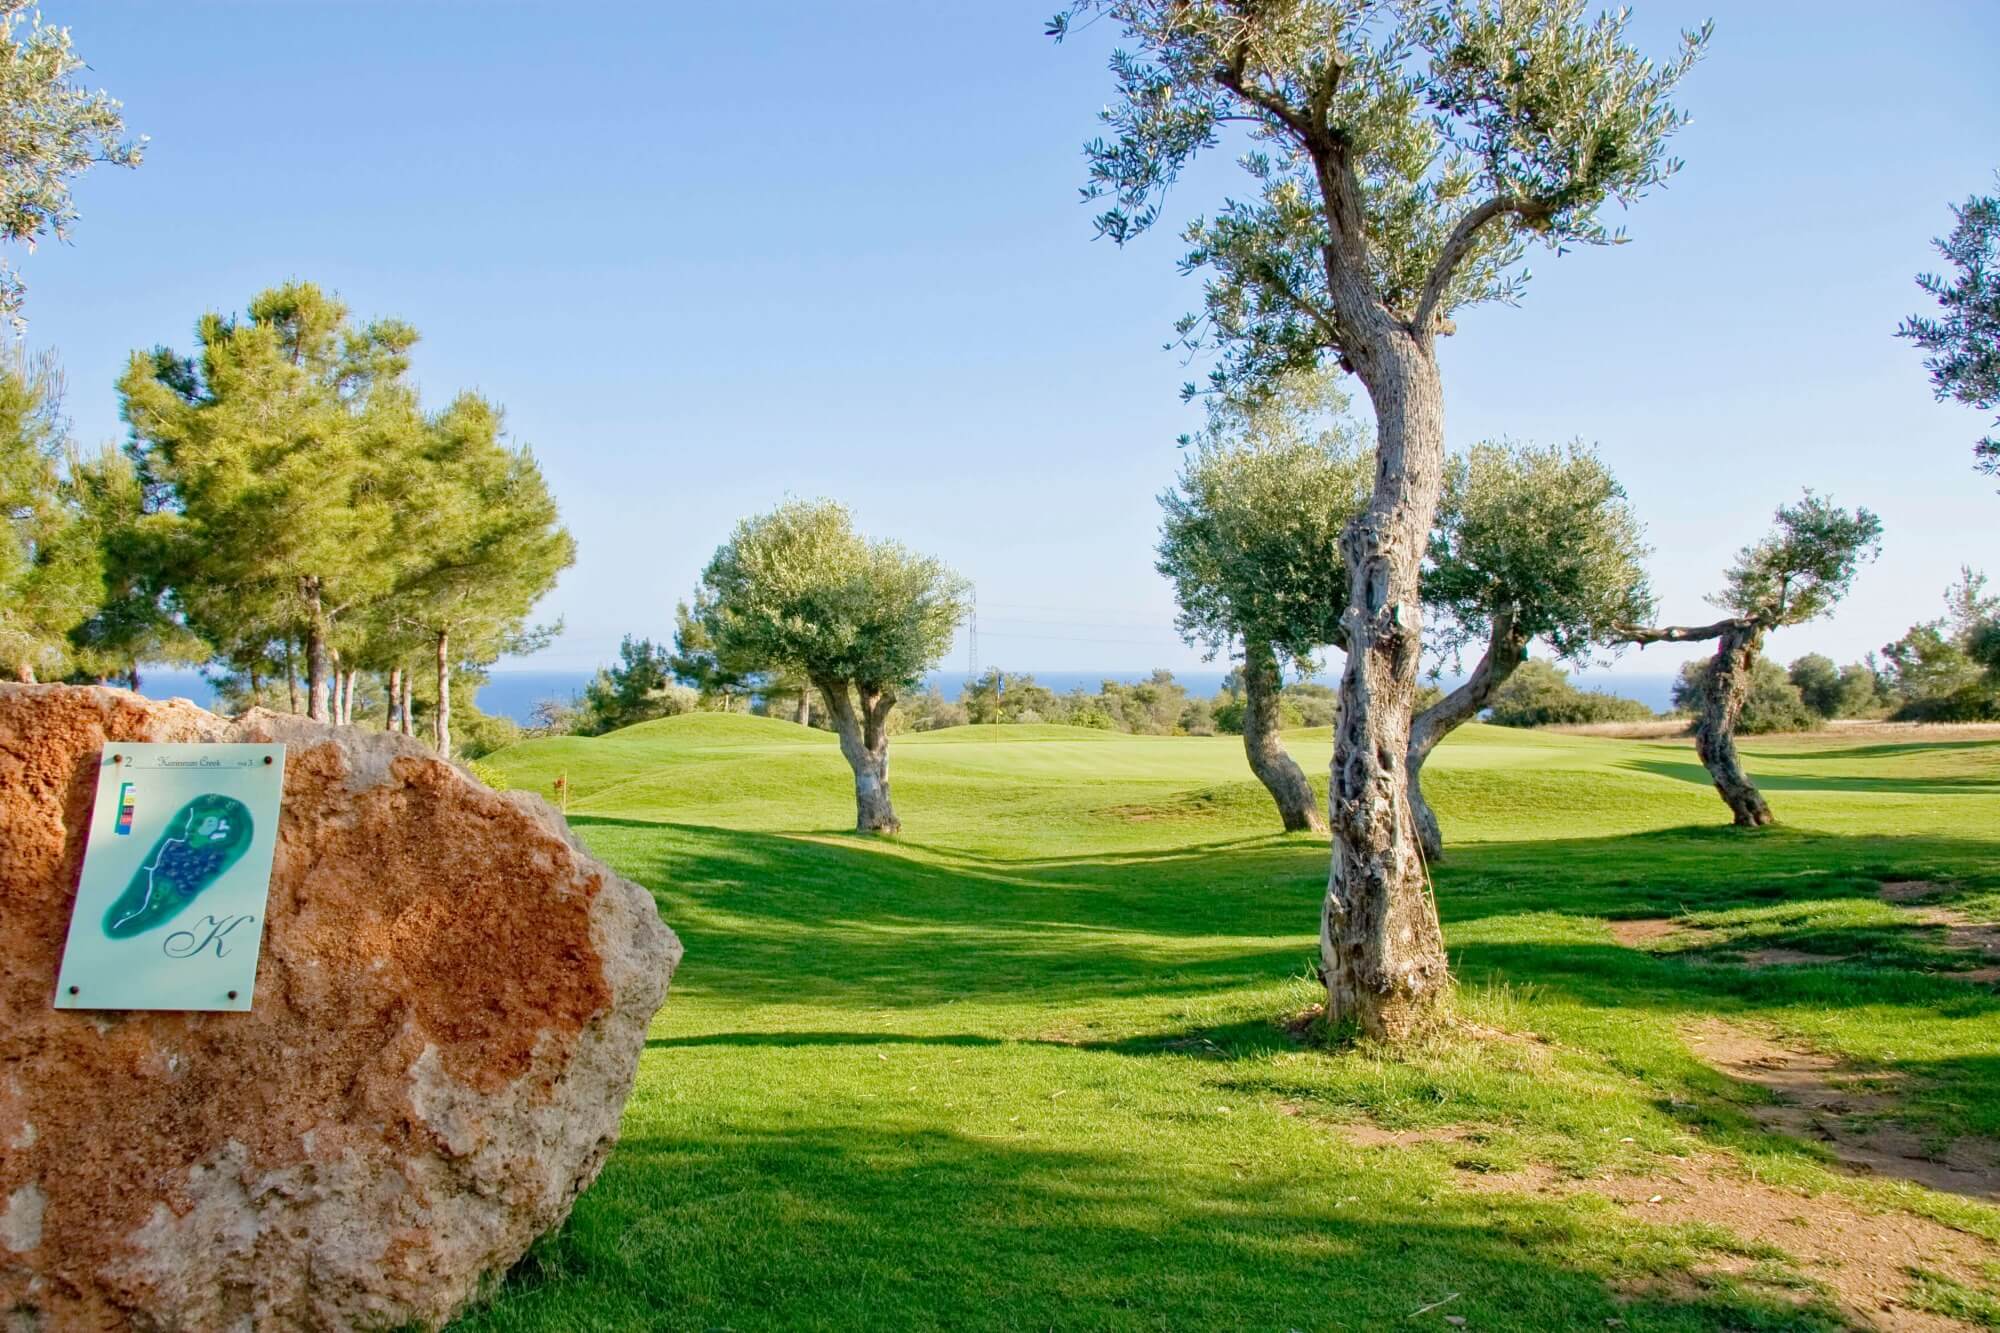 Enjoy a game of golf surrounded by luscious gardens...